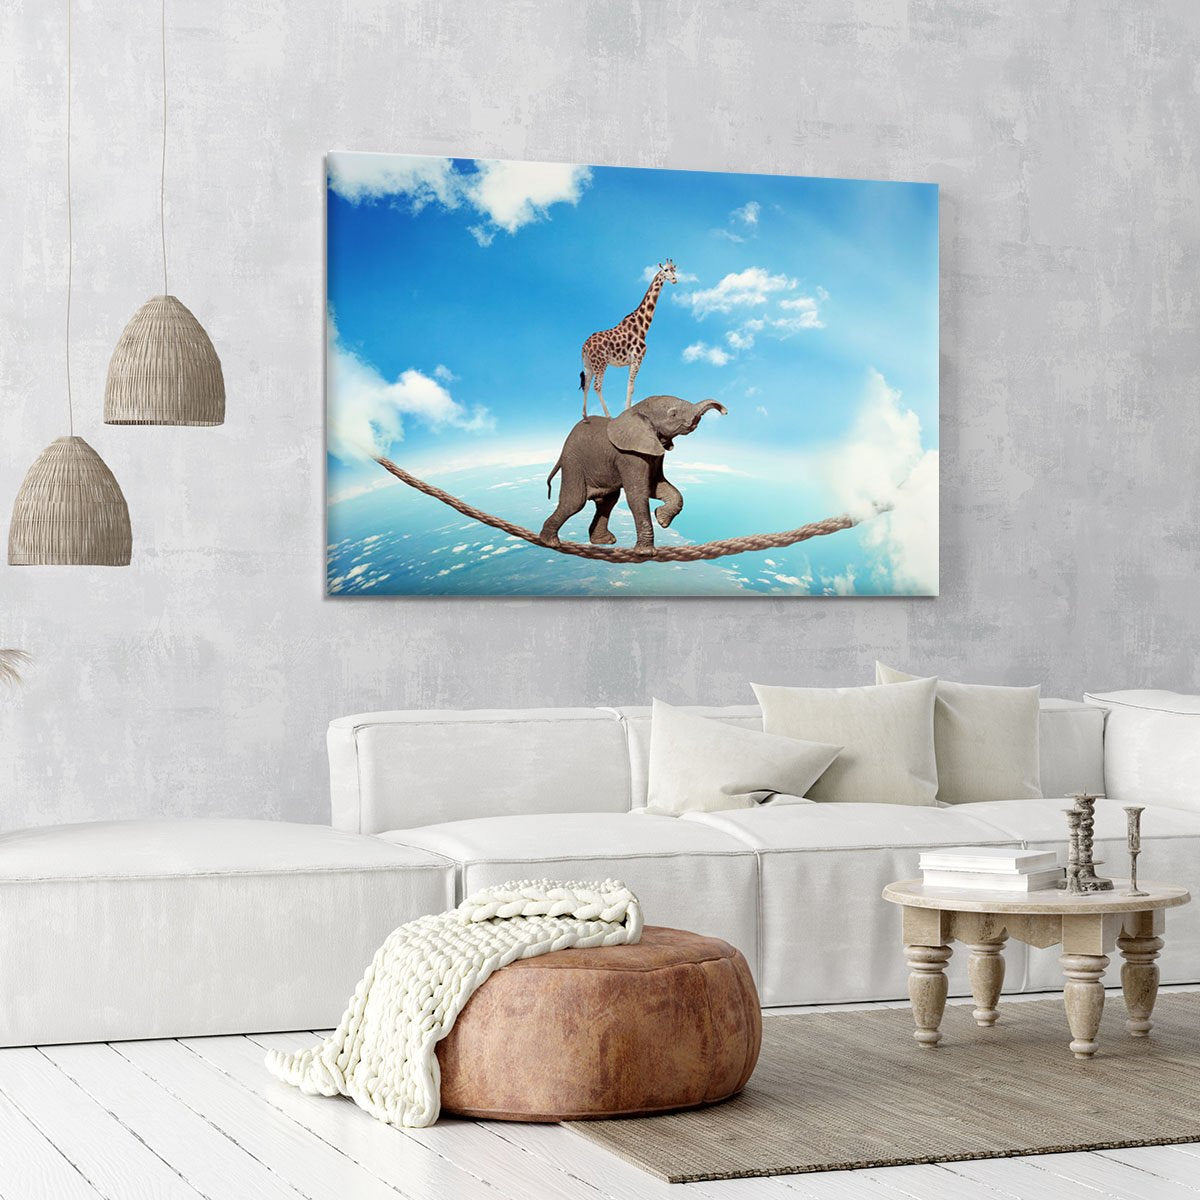 Elephant with giraffe walking on dangerous rope high in sky Canvas Print or Poster